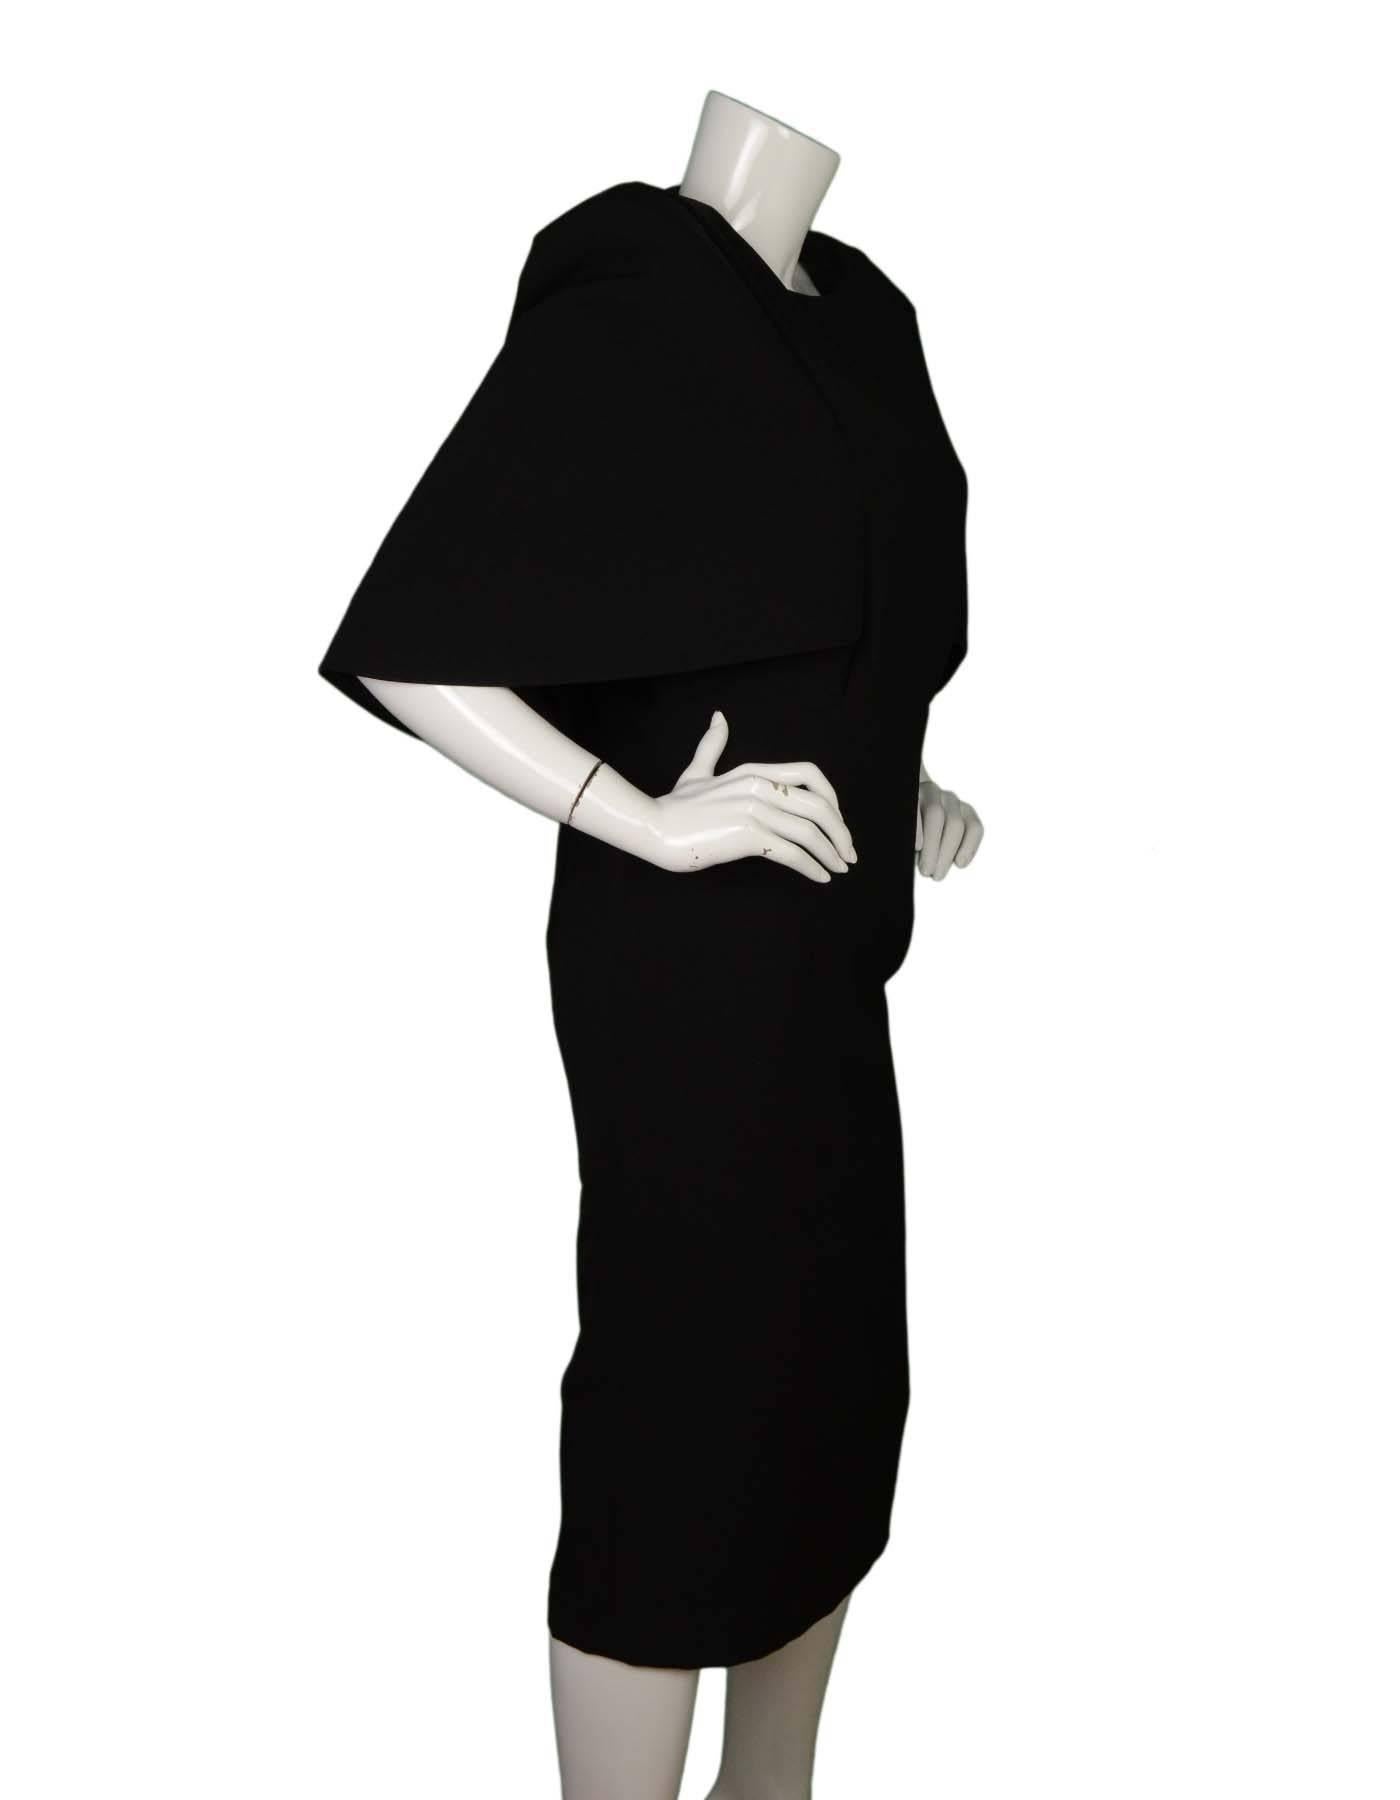 AQ/AQ Black Caped Cocktail Dress 
Features attached cape with shoulder pads for sharp, squared shoulders
Made In: China
Color: Black
Composition: 97% polyester, 3% elastane
Lining: Black, 100% polyester
Closure/Opening: Back center zip